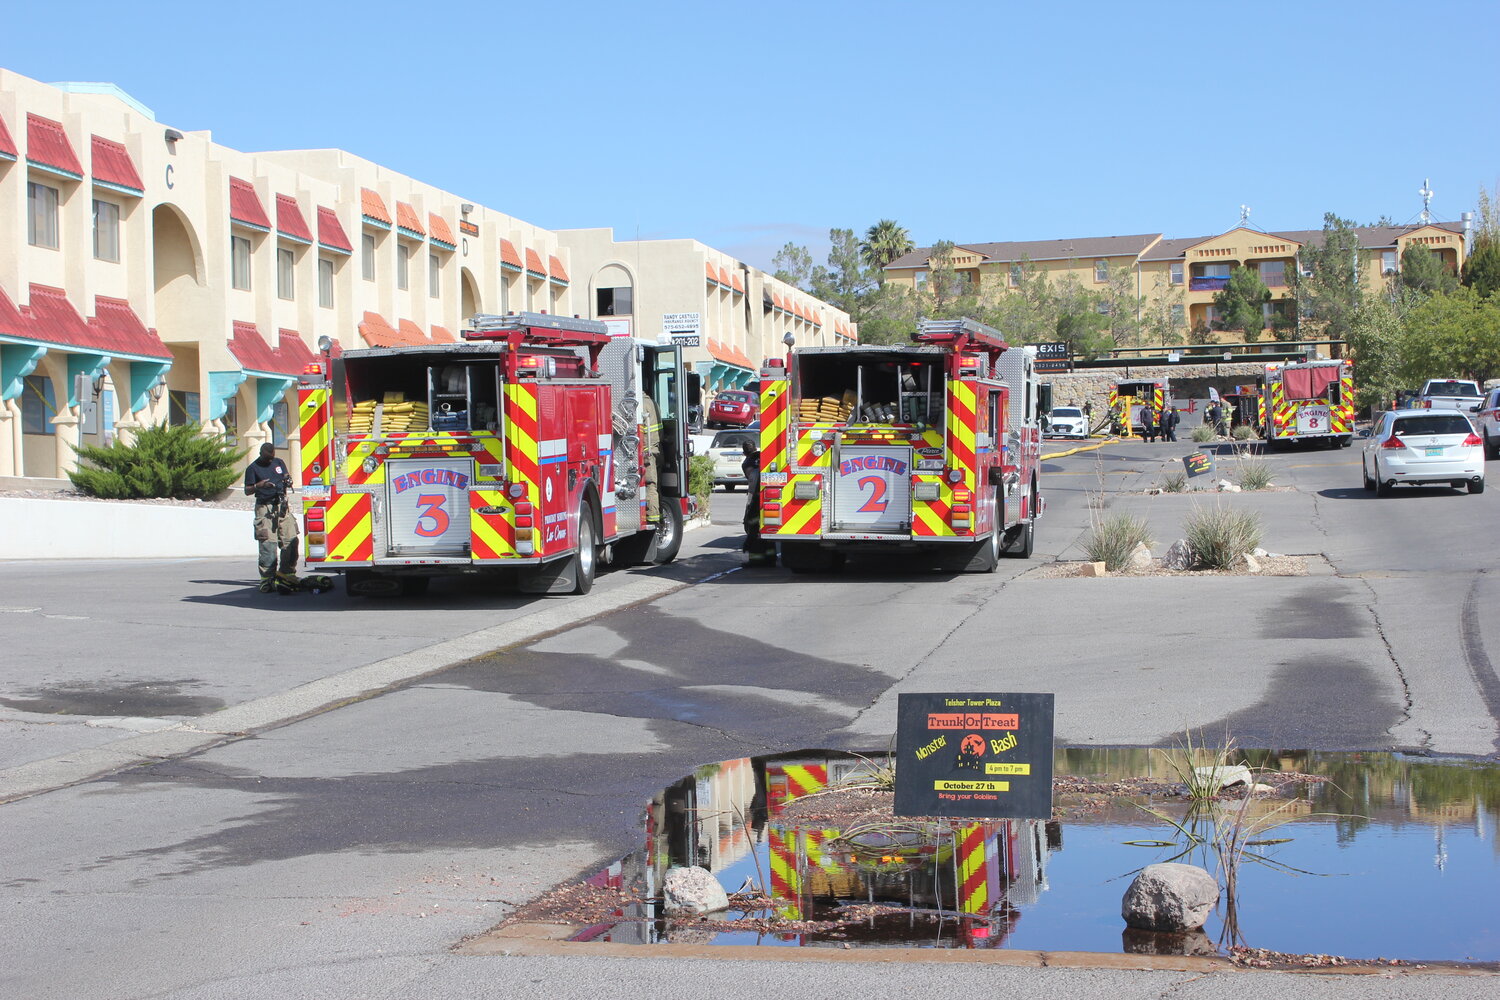 Las Cruces Fire Department personnel responded Oct. 30 to a fire at the Telshor Tower Plaza, 755 S. Telshor Blvd. Firefighter had the fire under control and all occupants escaped safely.